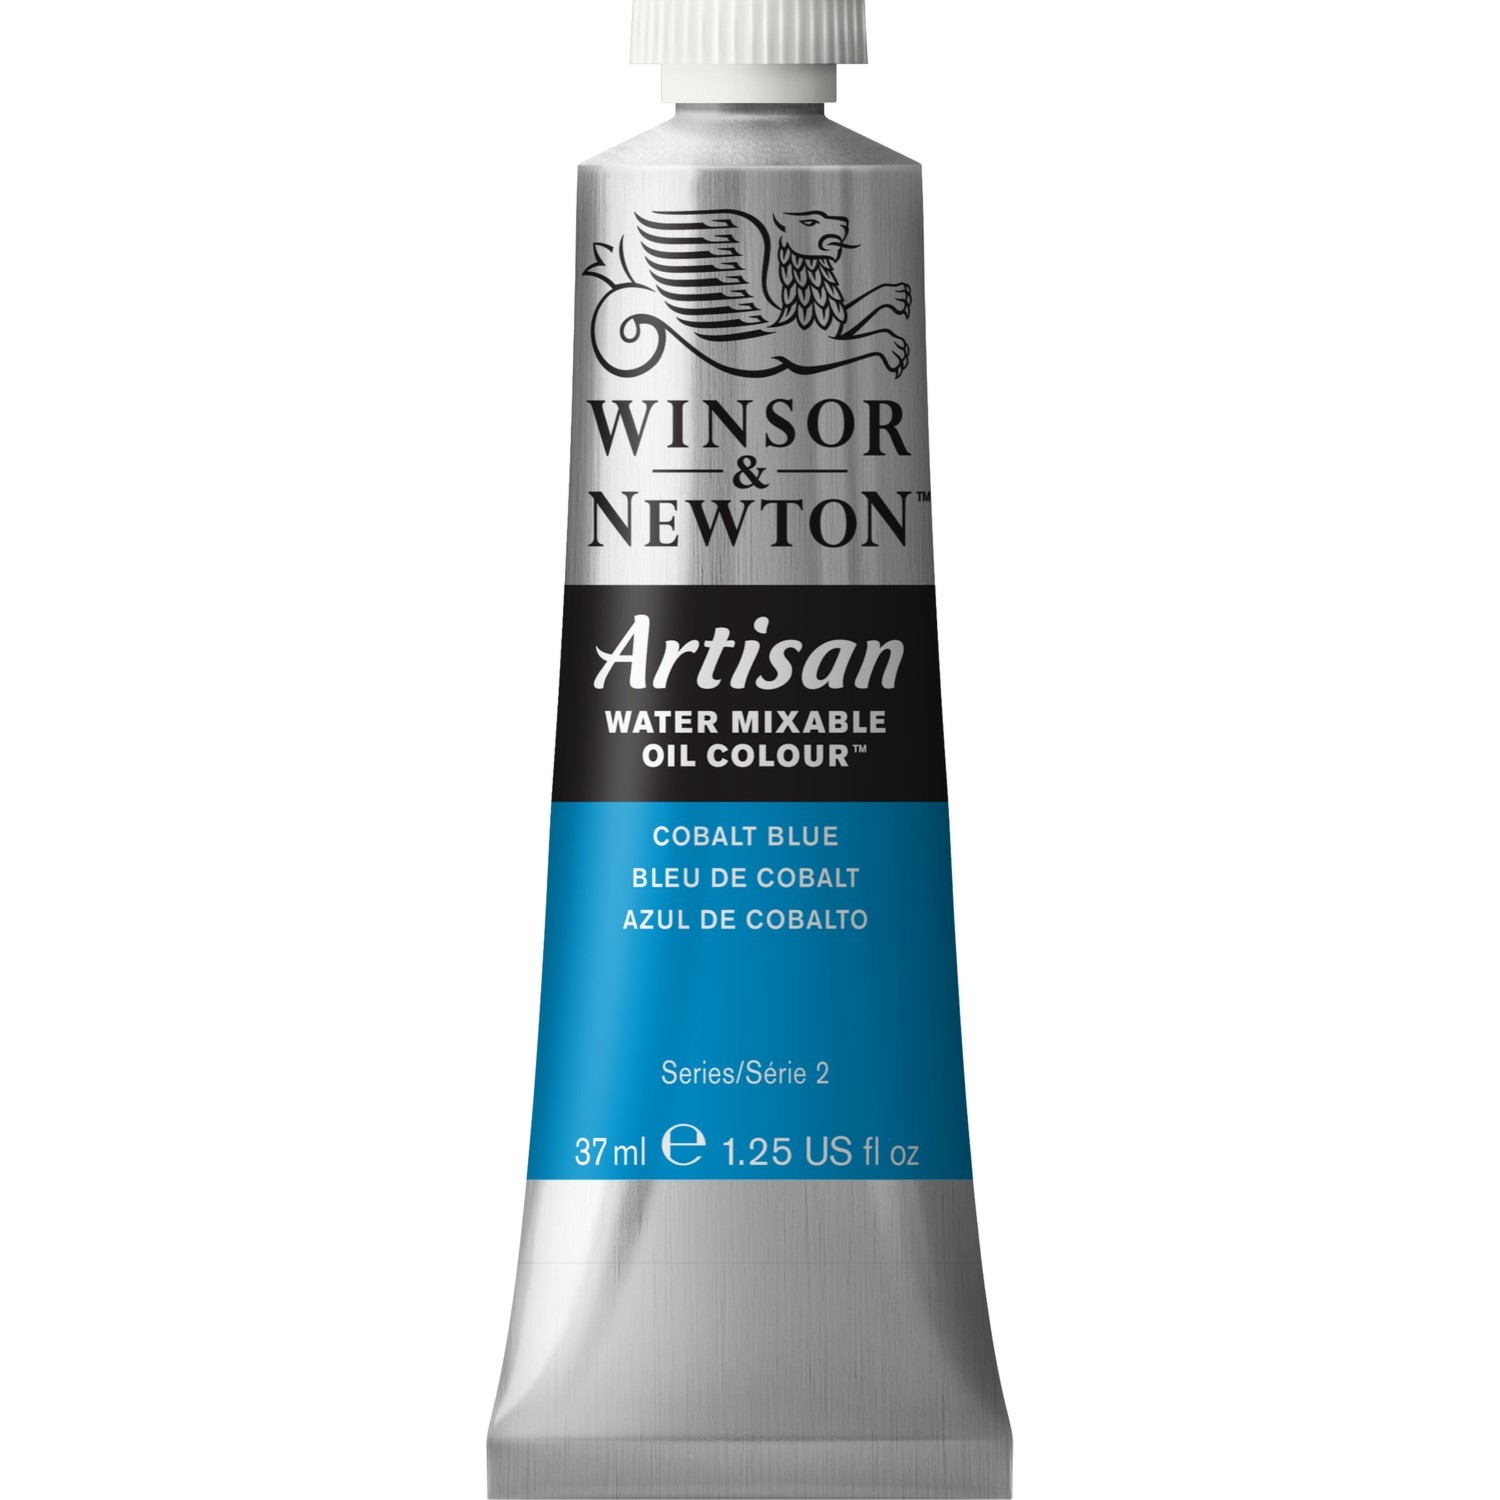 Winsor and Newton 37ml Artisan Mixable Oil Paint - Cobalt Blue Image 1